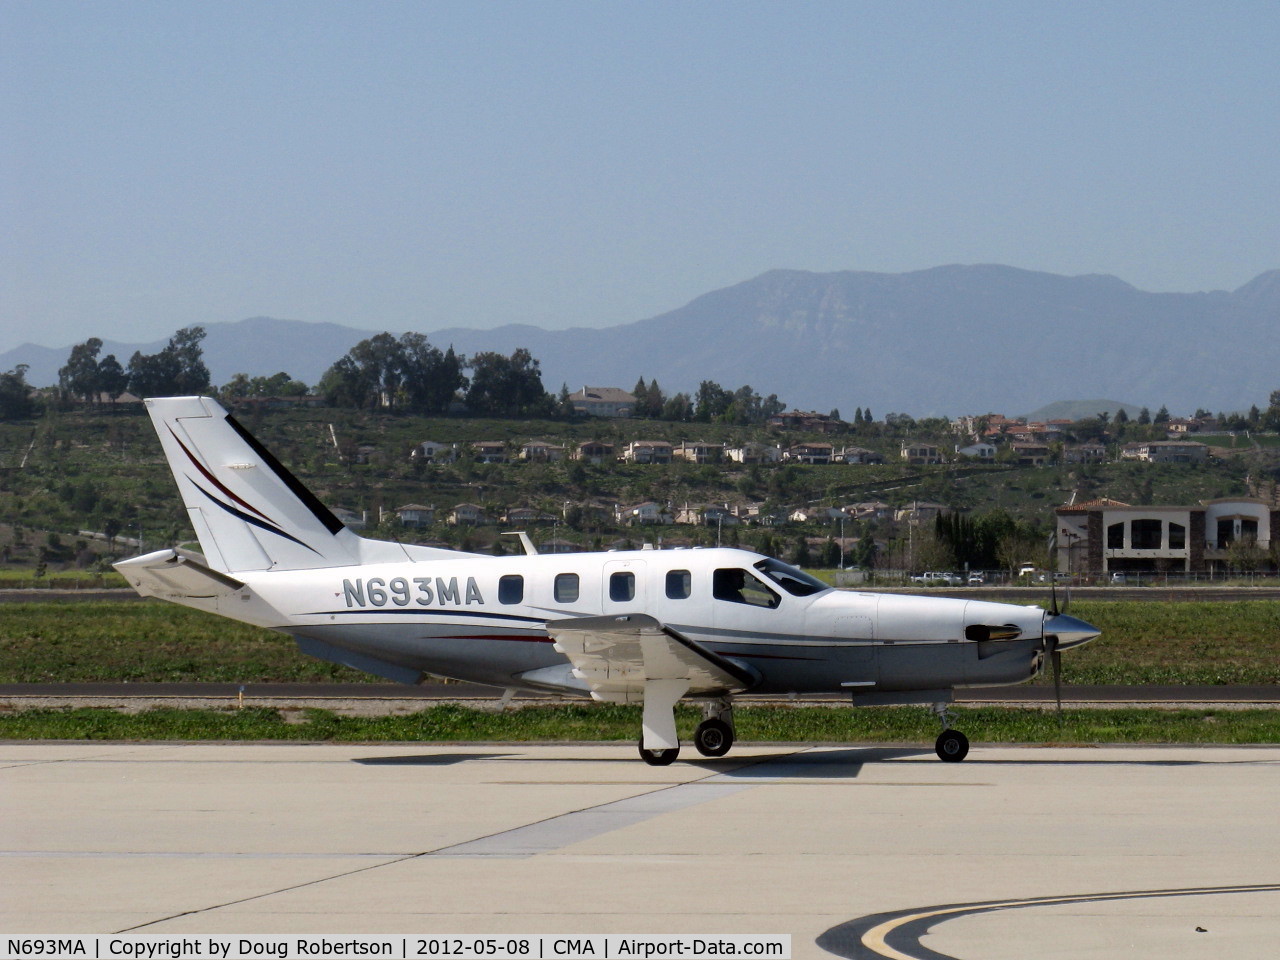 N693MA, 2004 Socata TBM-700 C/N 293, 2004 SOCATA TBM 700, P&W(C)PT6A-64 turboprop 1,570 shp flat rated at 700 shp, taxi to ramp